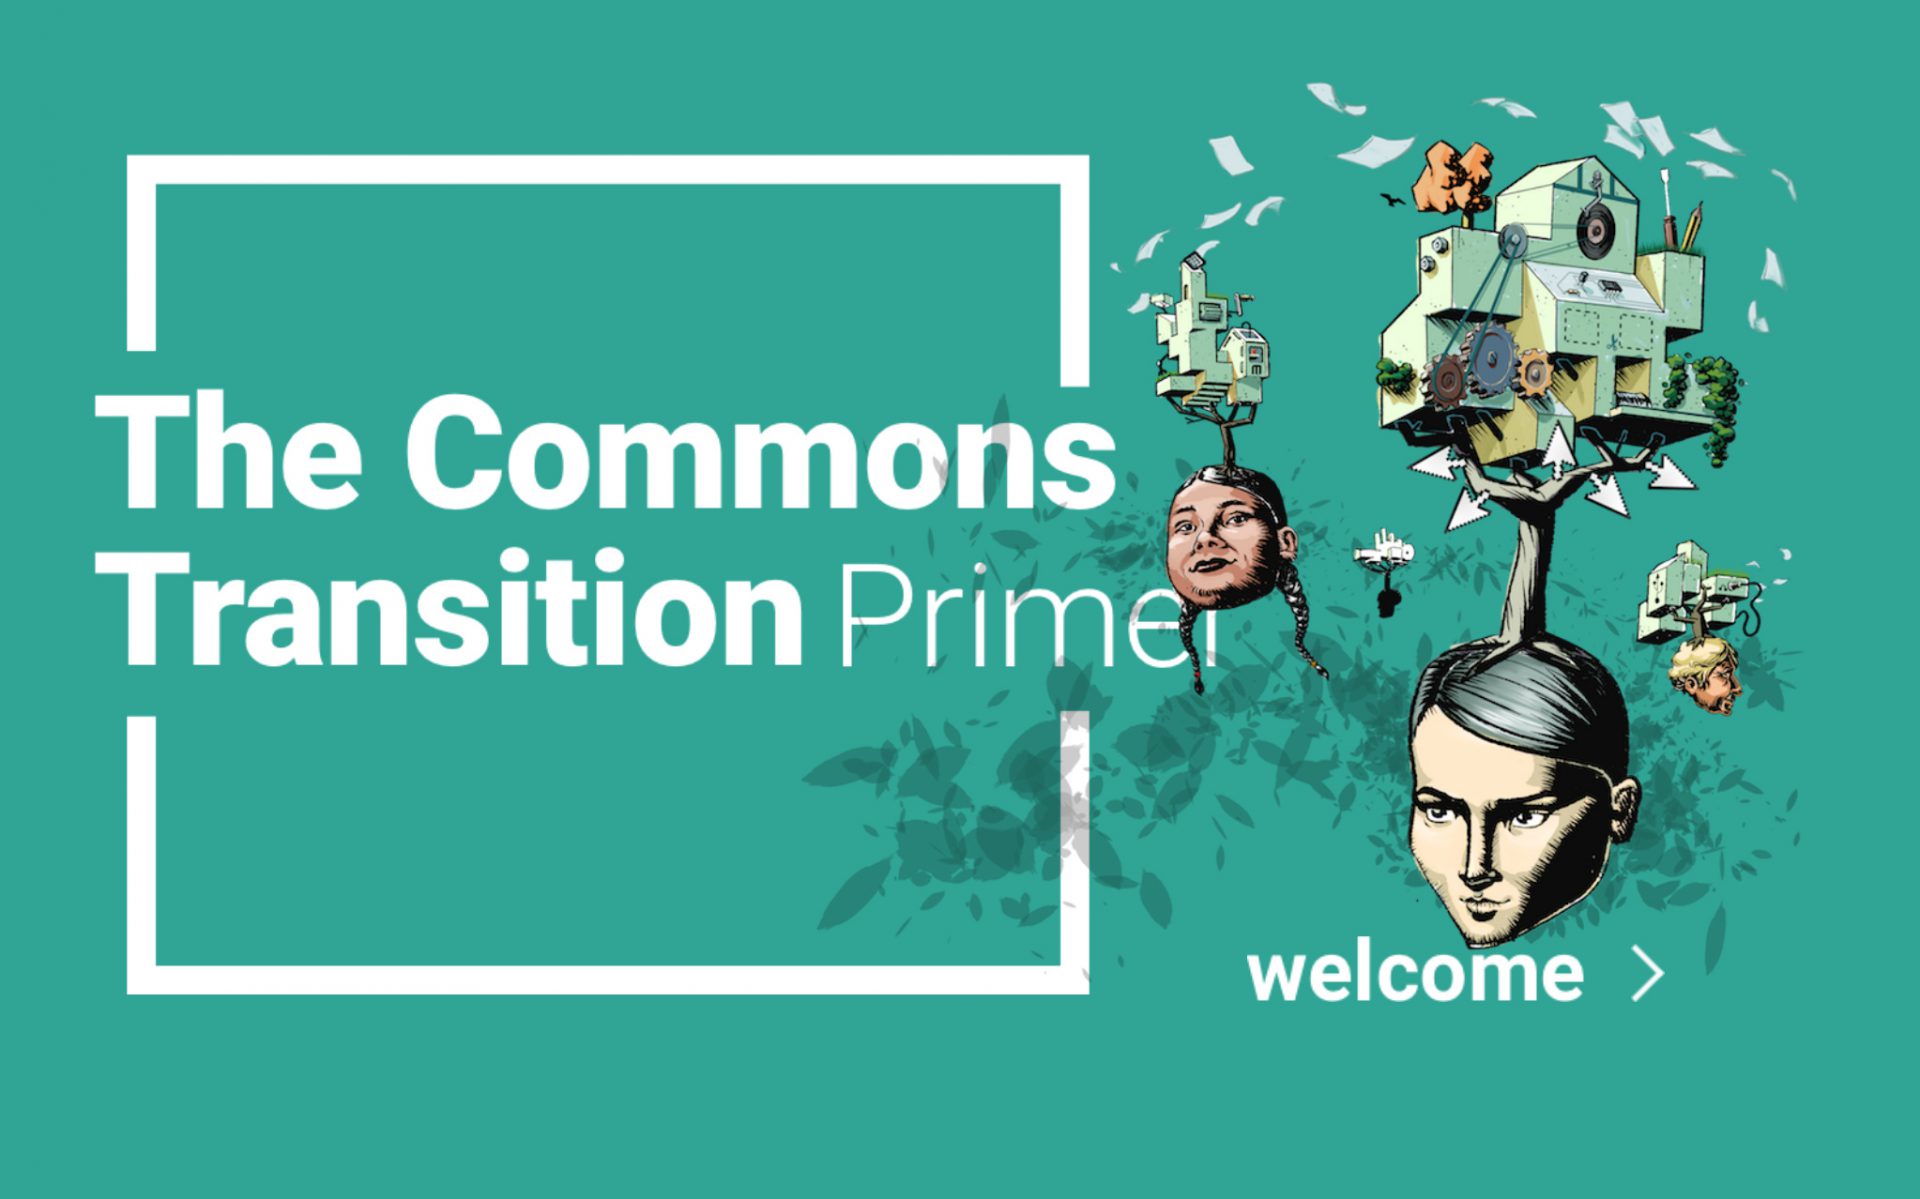 The Commons Transition Primer Demystifies and Delights